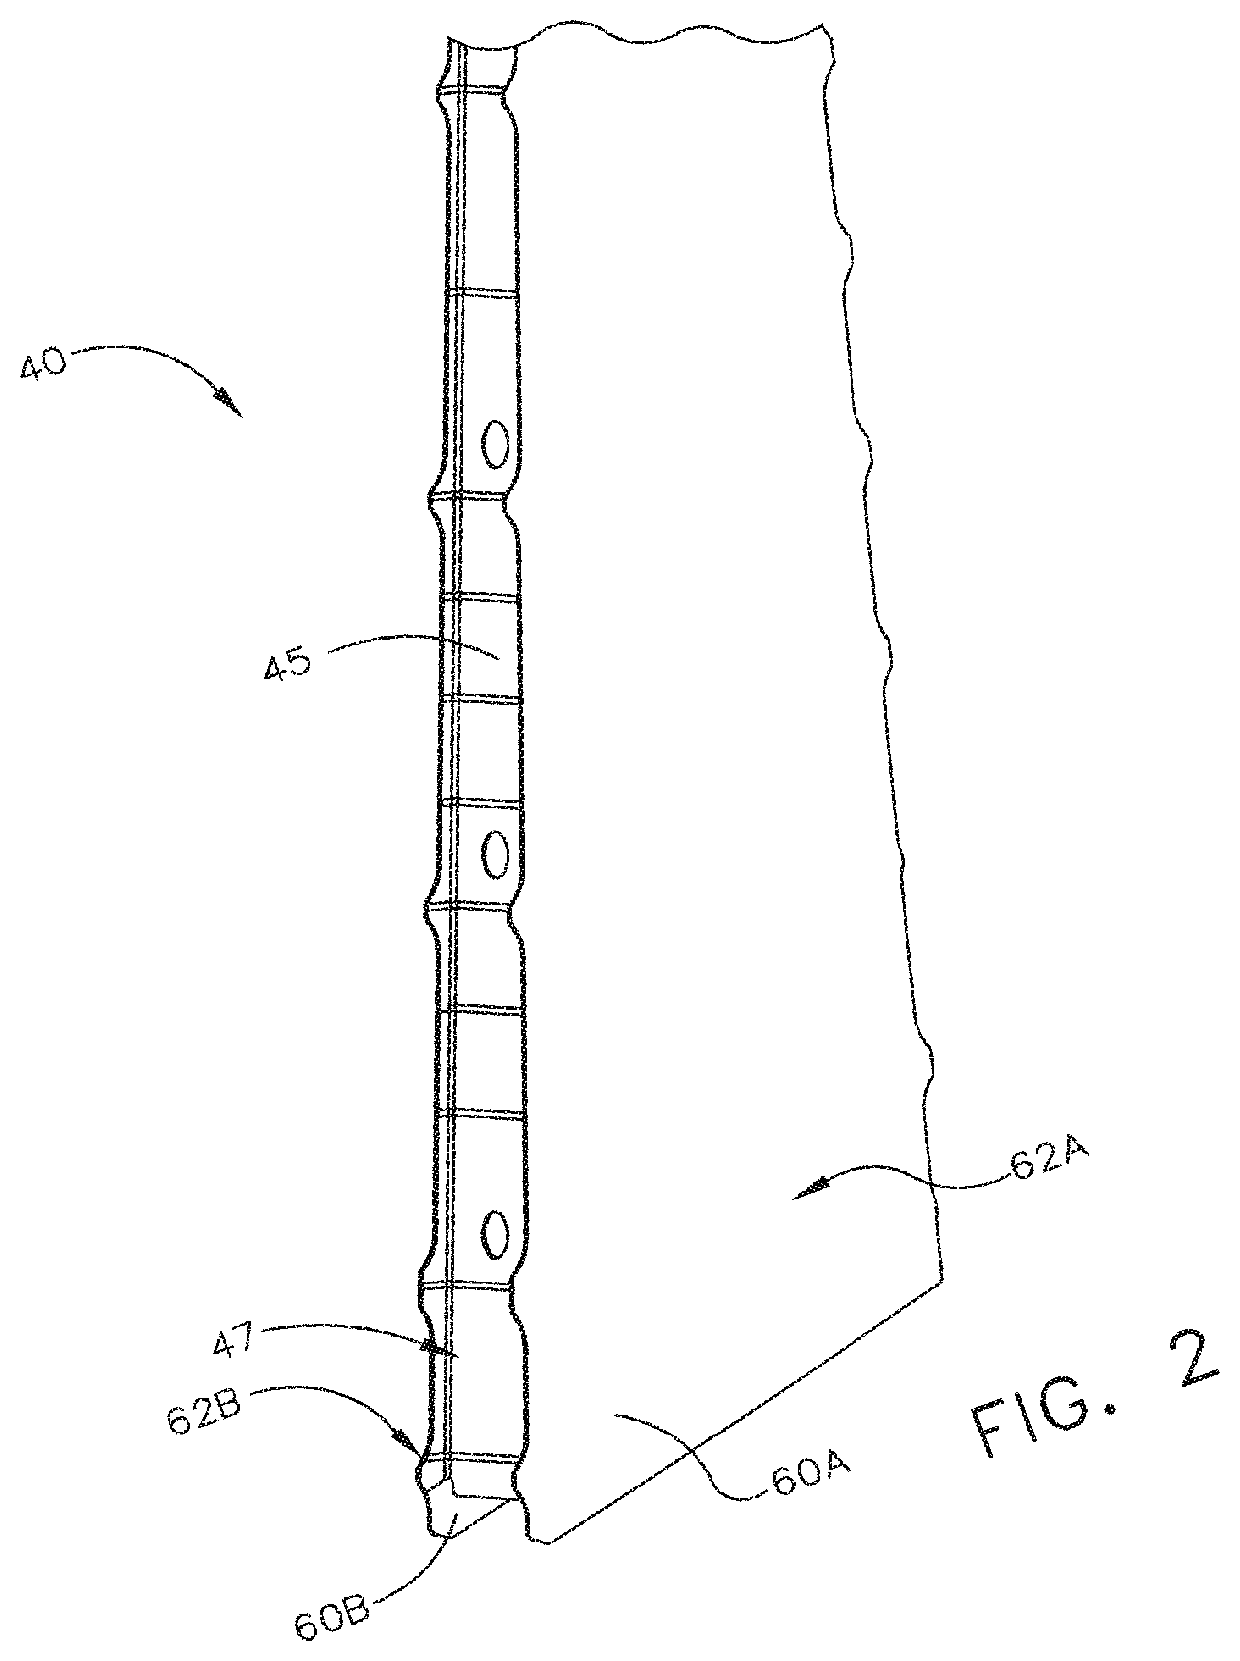 Method and System for Coupling a Vertical Stabilizer to an Aircraft Fuselage